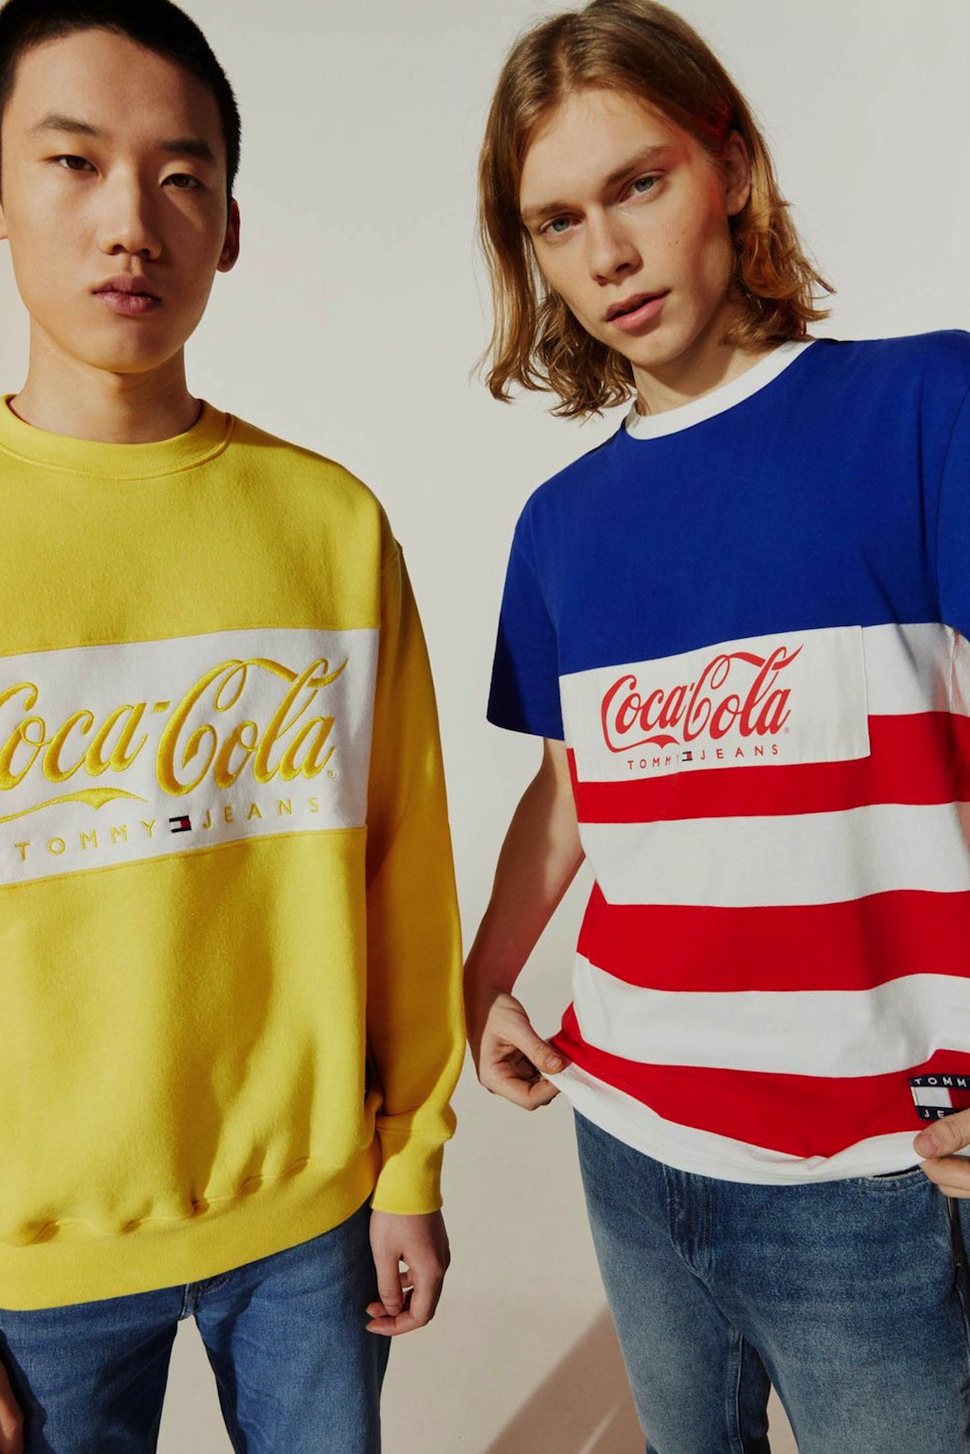 Coca Cola Tommy Hilfiger on Sale, 54% OFF | www.hcb.cat